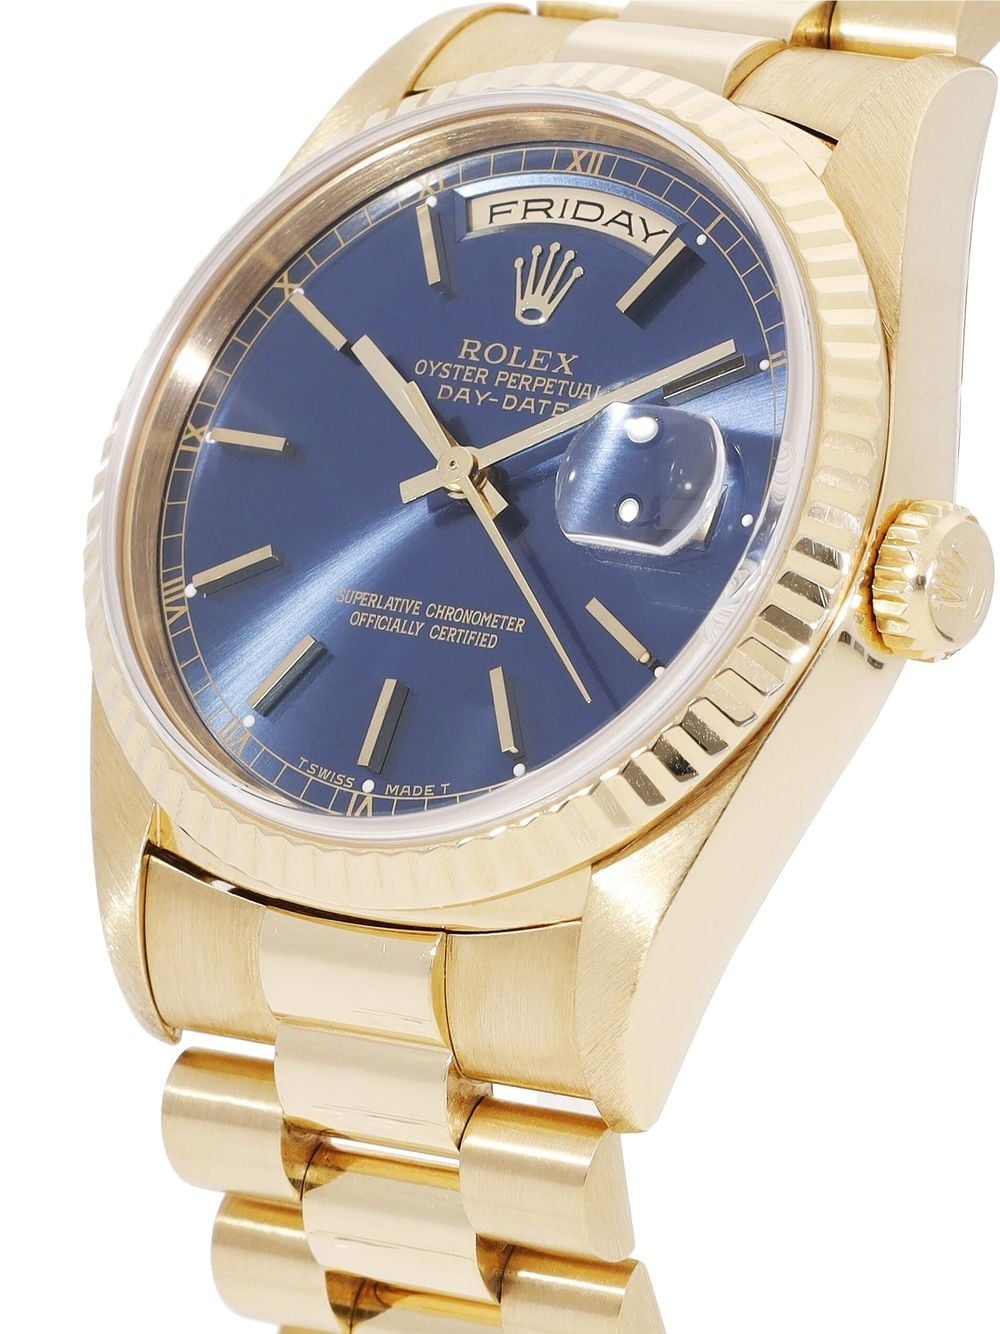 Rolex 1998 pre-owned Day-Date horloge - Blauw